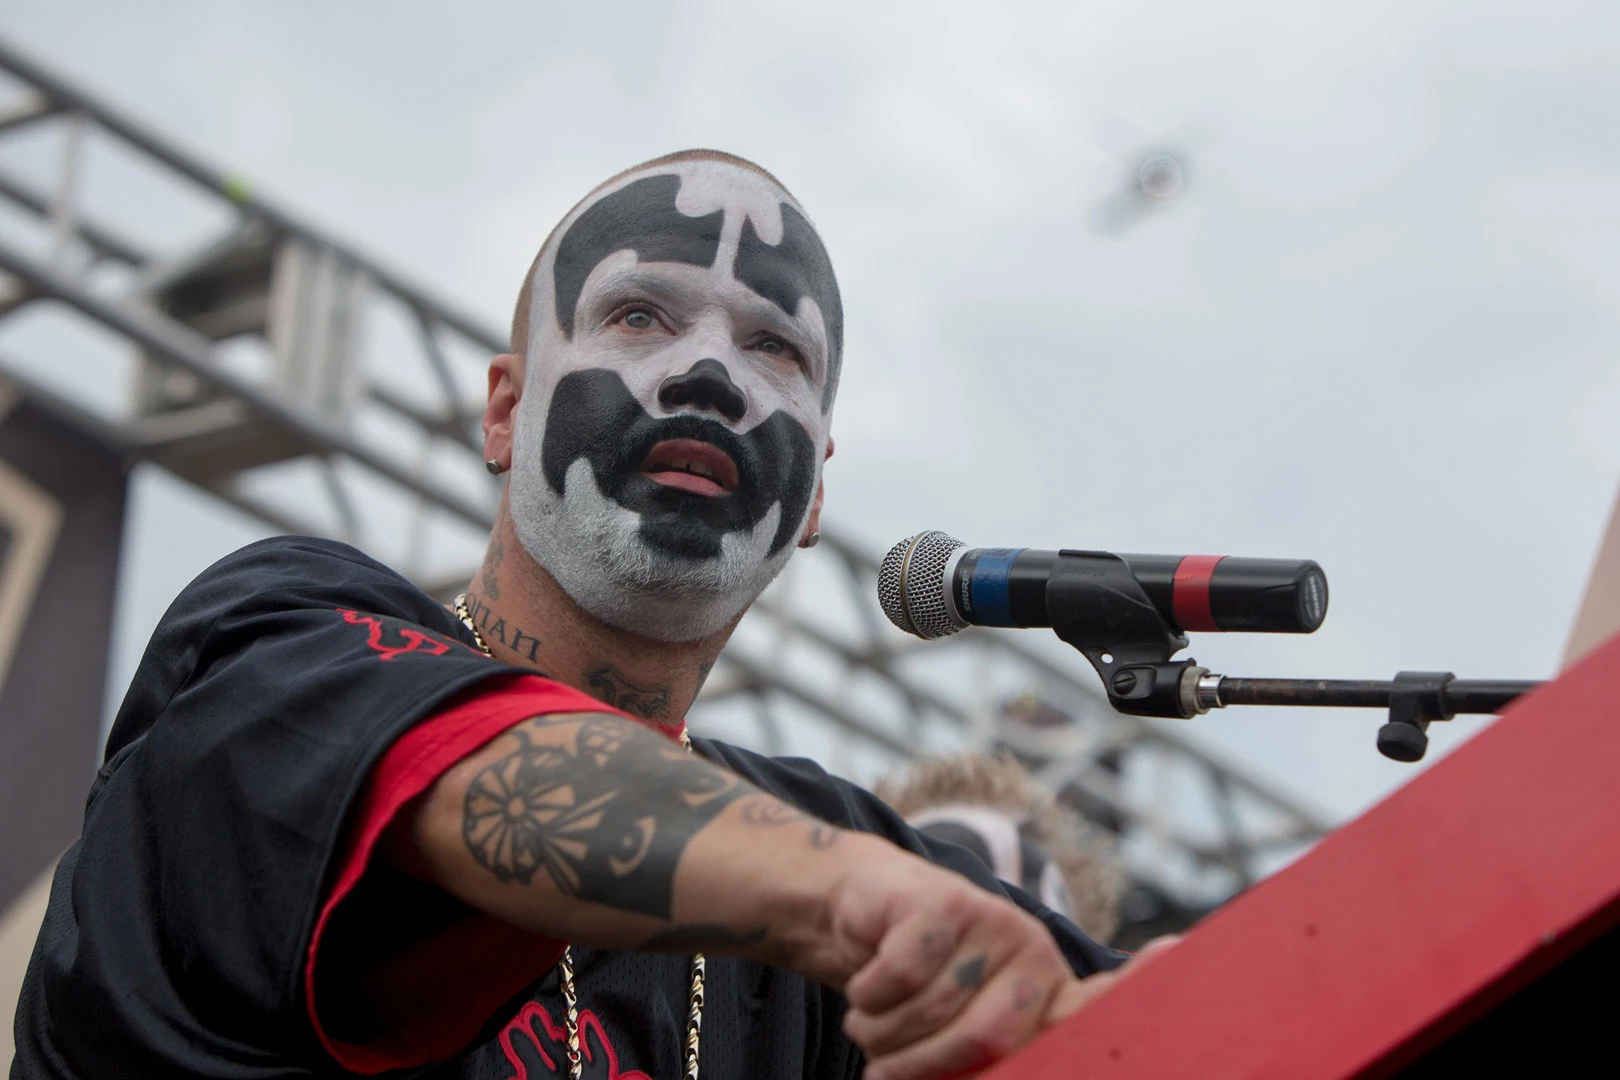 Shaggy 2 Dope Porn - Insane Clown Posse Member Hospitalized, But Not Due to Dirt Snow